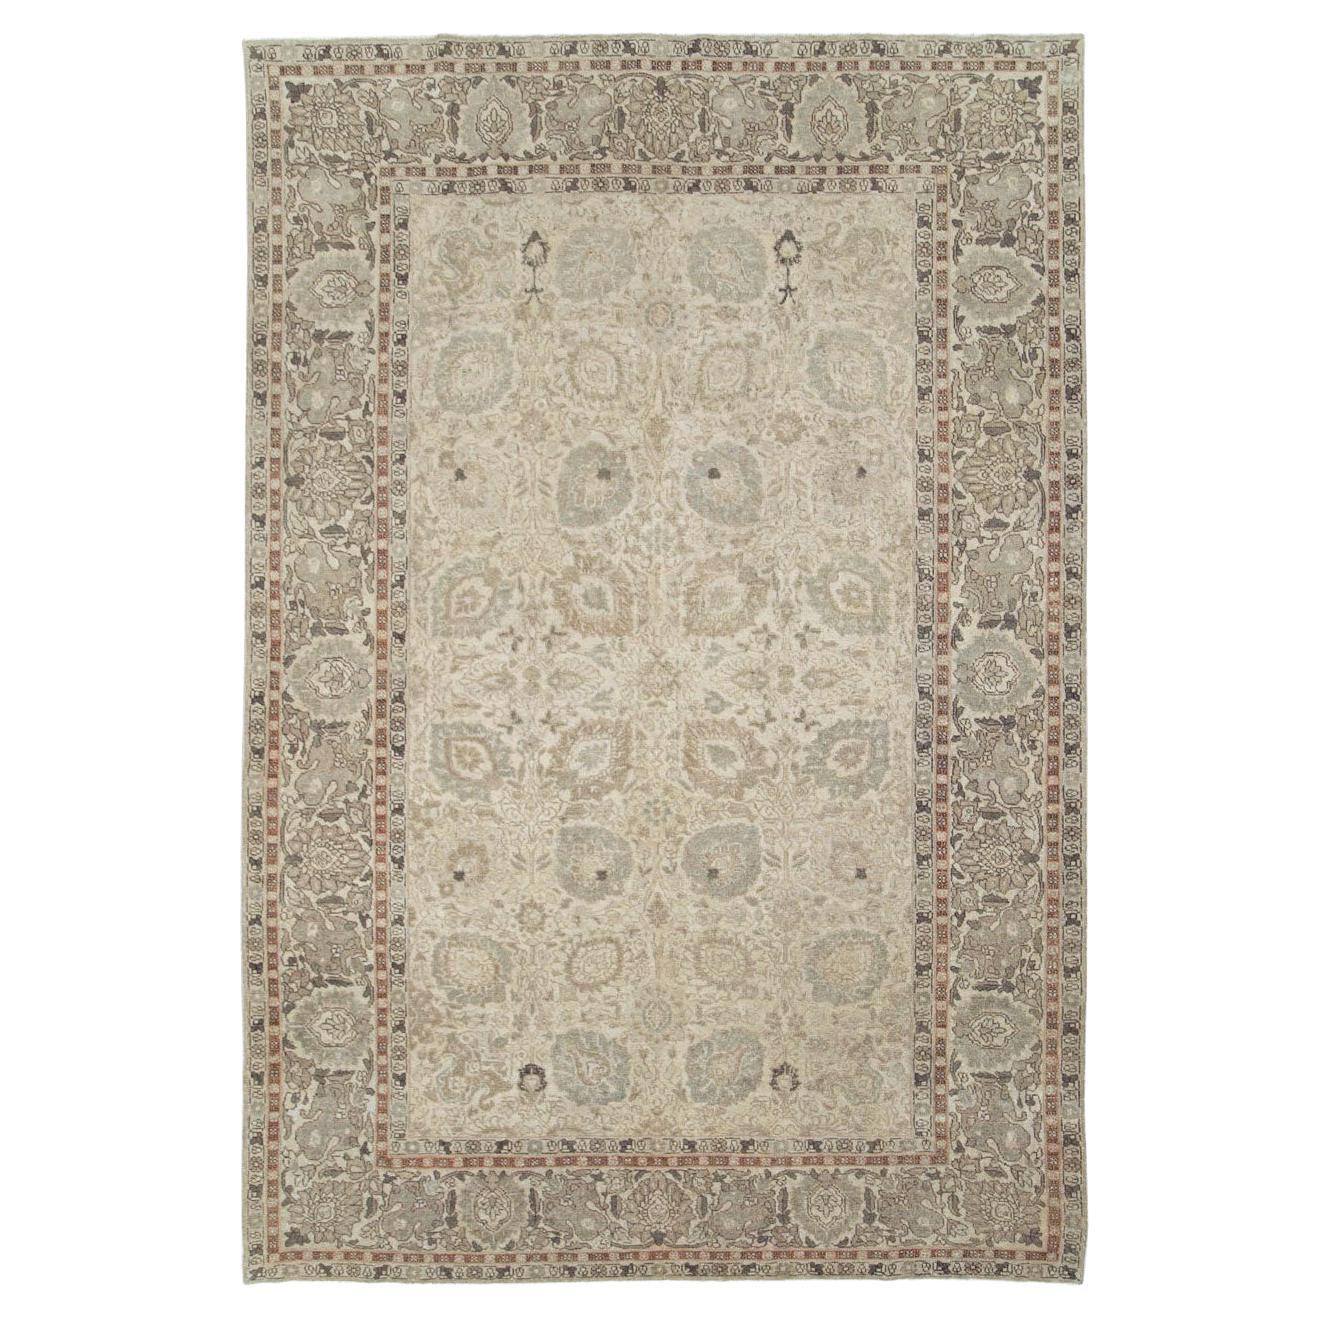 Early 20th Century Handmade Persian Tabriz Small Room Size Carpet For Sale